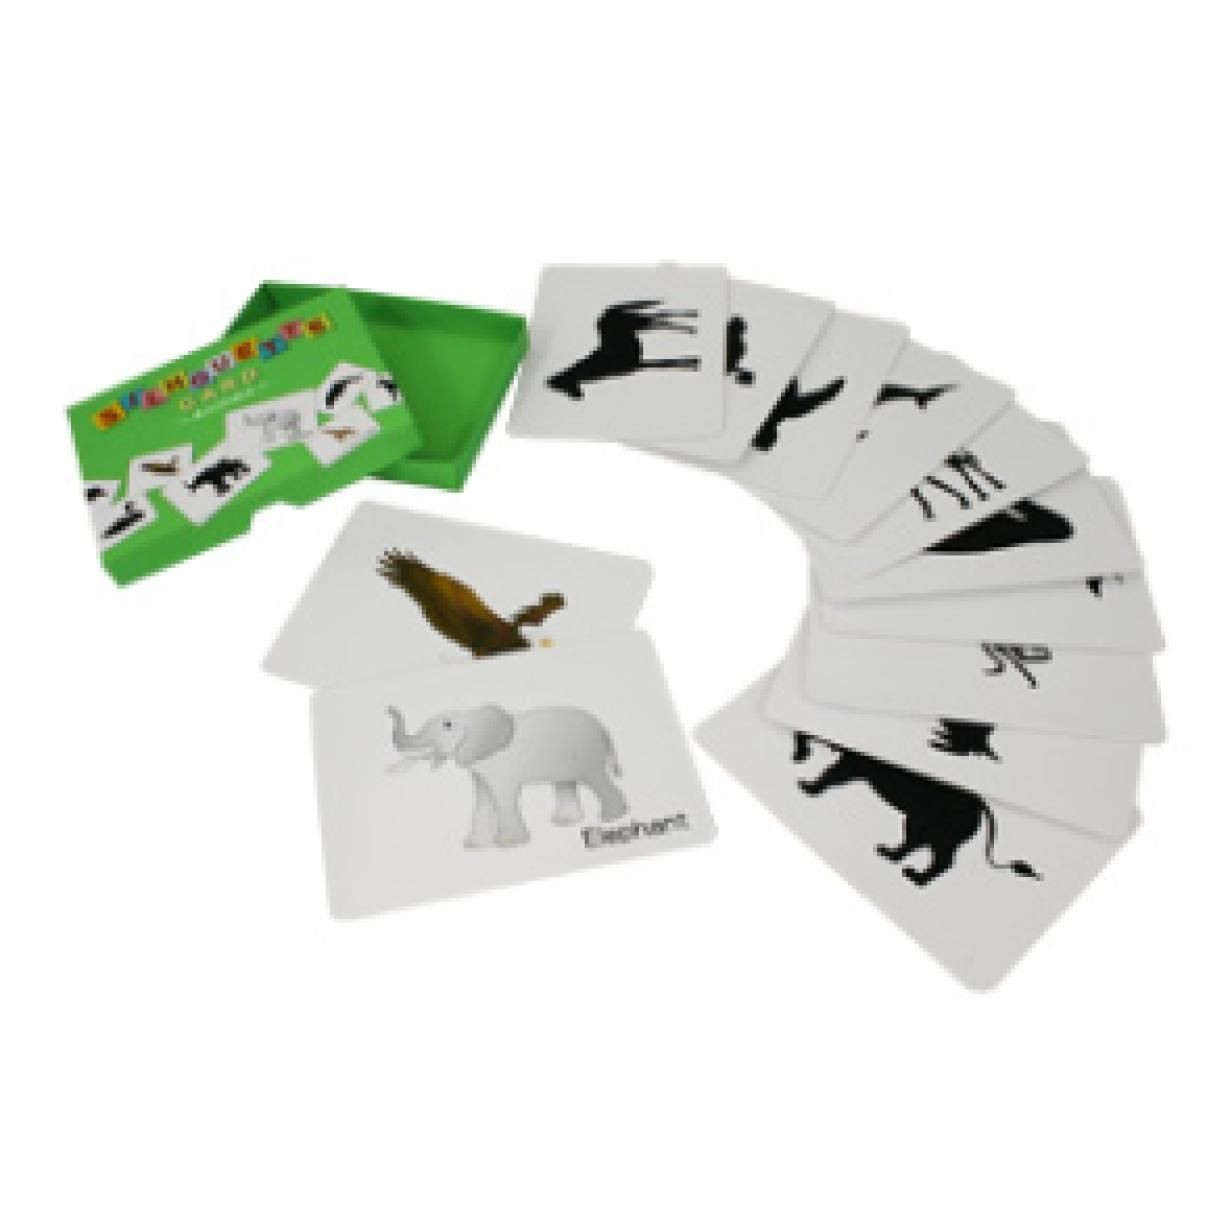 Canon Creative Park Papercraft Silhouette Card Animals toys Paper Craft Educational Game